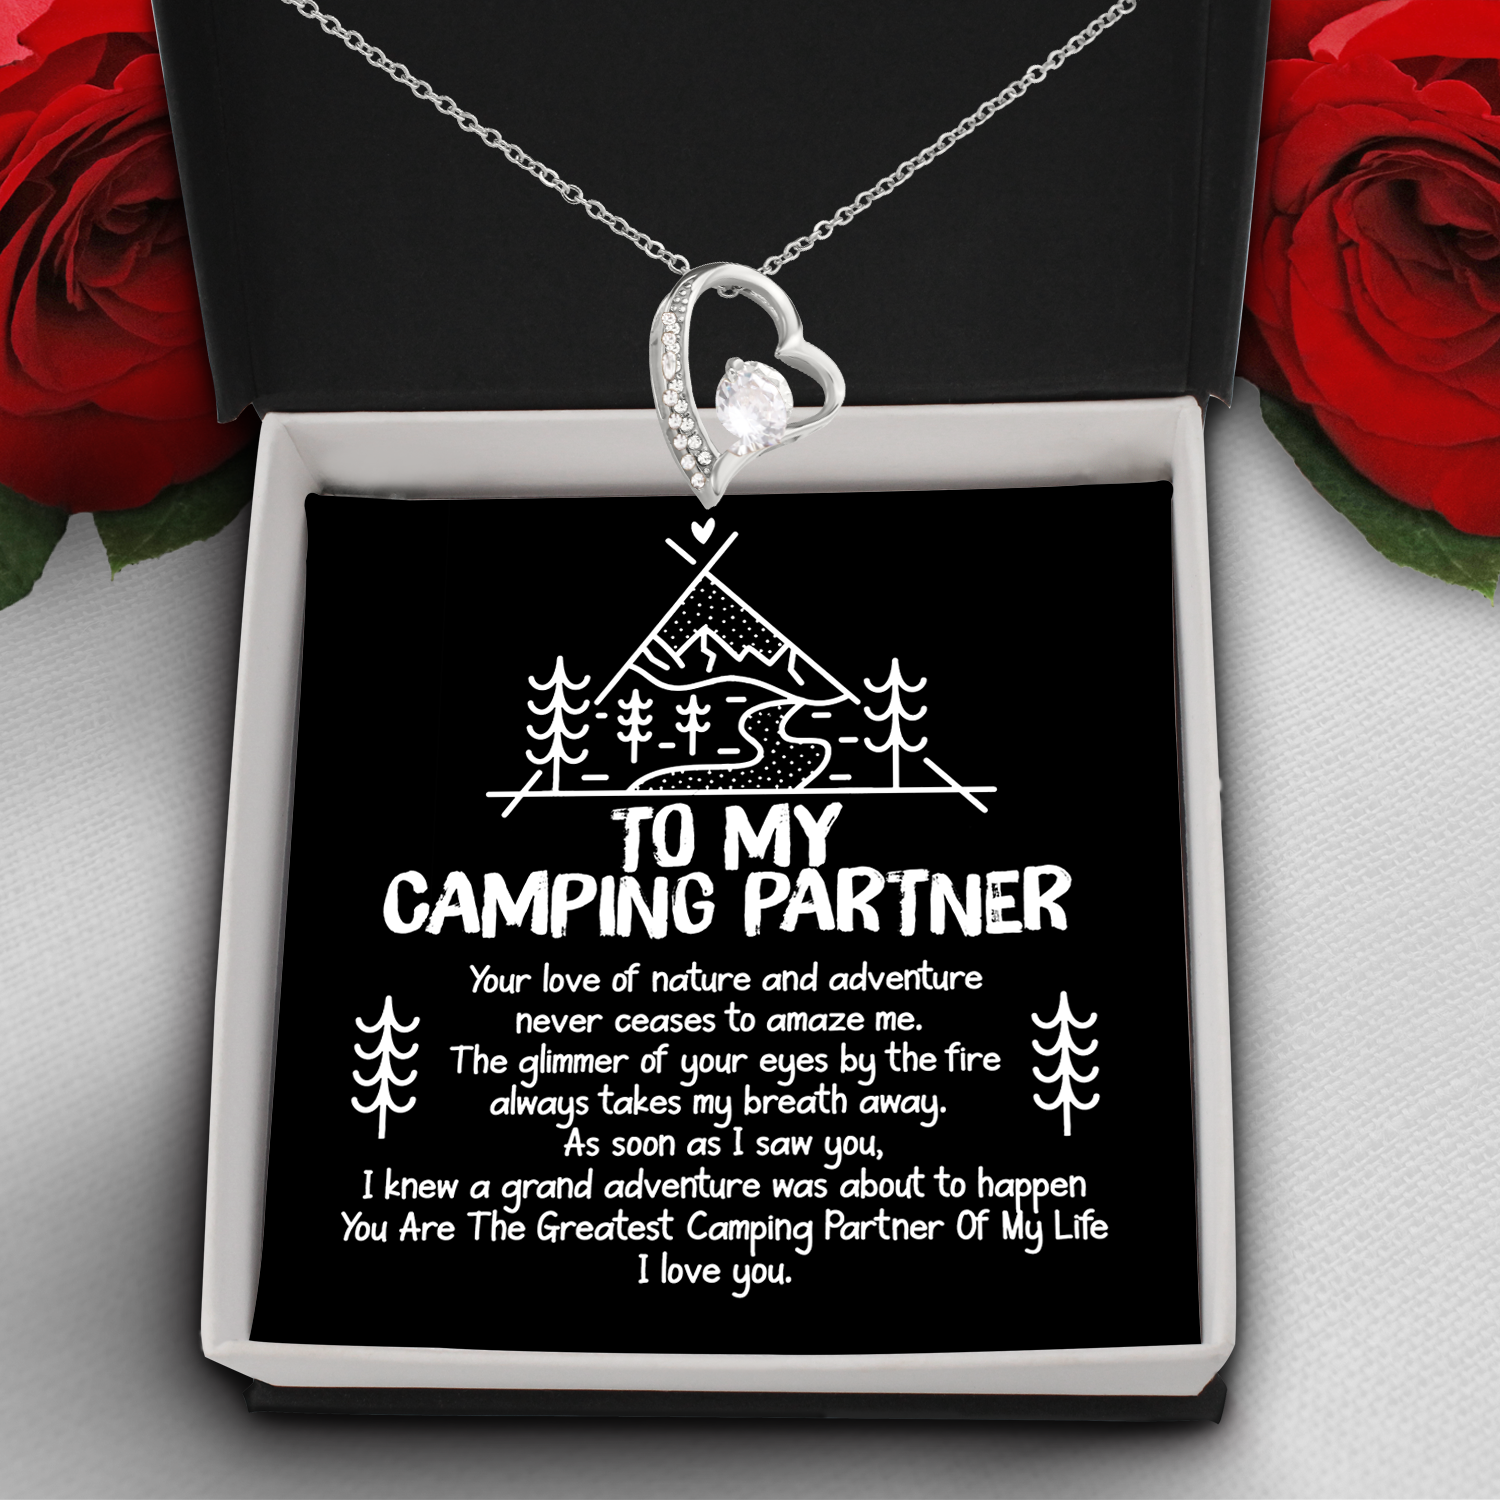 Forever Love Necklace - Camping - To My Camping Partner - I Love You - Uksnr13013